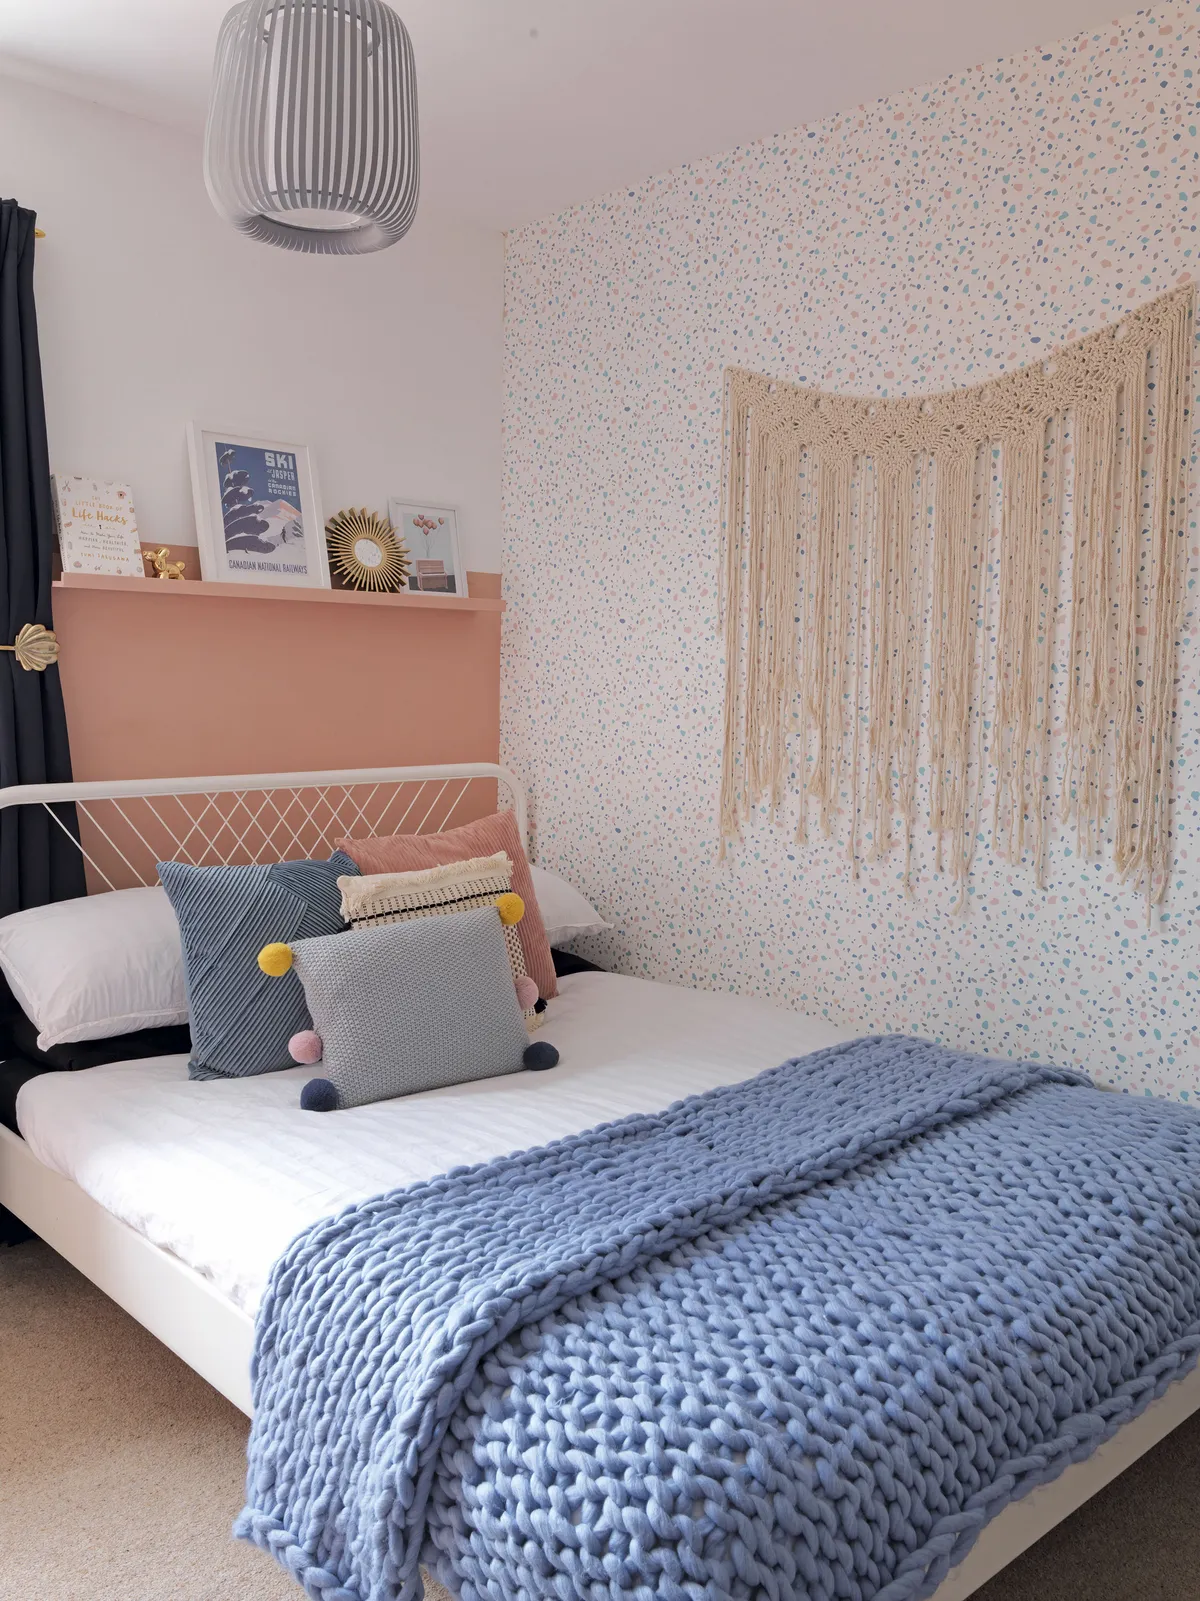 Every room in the house has lots of texture, including the spare bedroom, with wool knitted blankets, macramé wall hangings and even pompom cushion trims, giving it a cosy feel